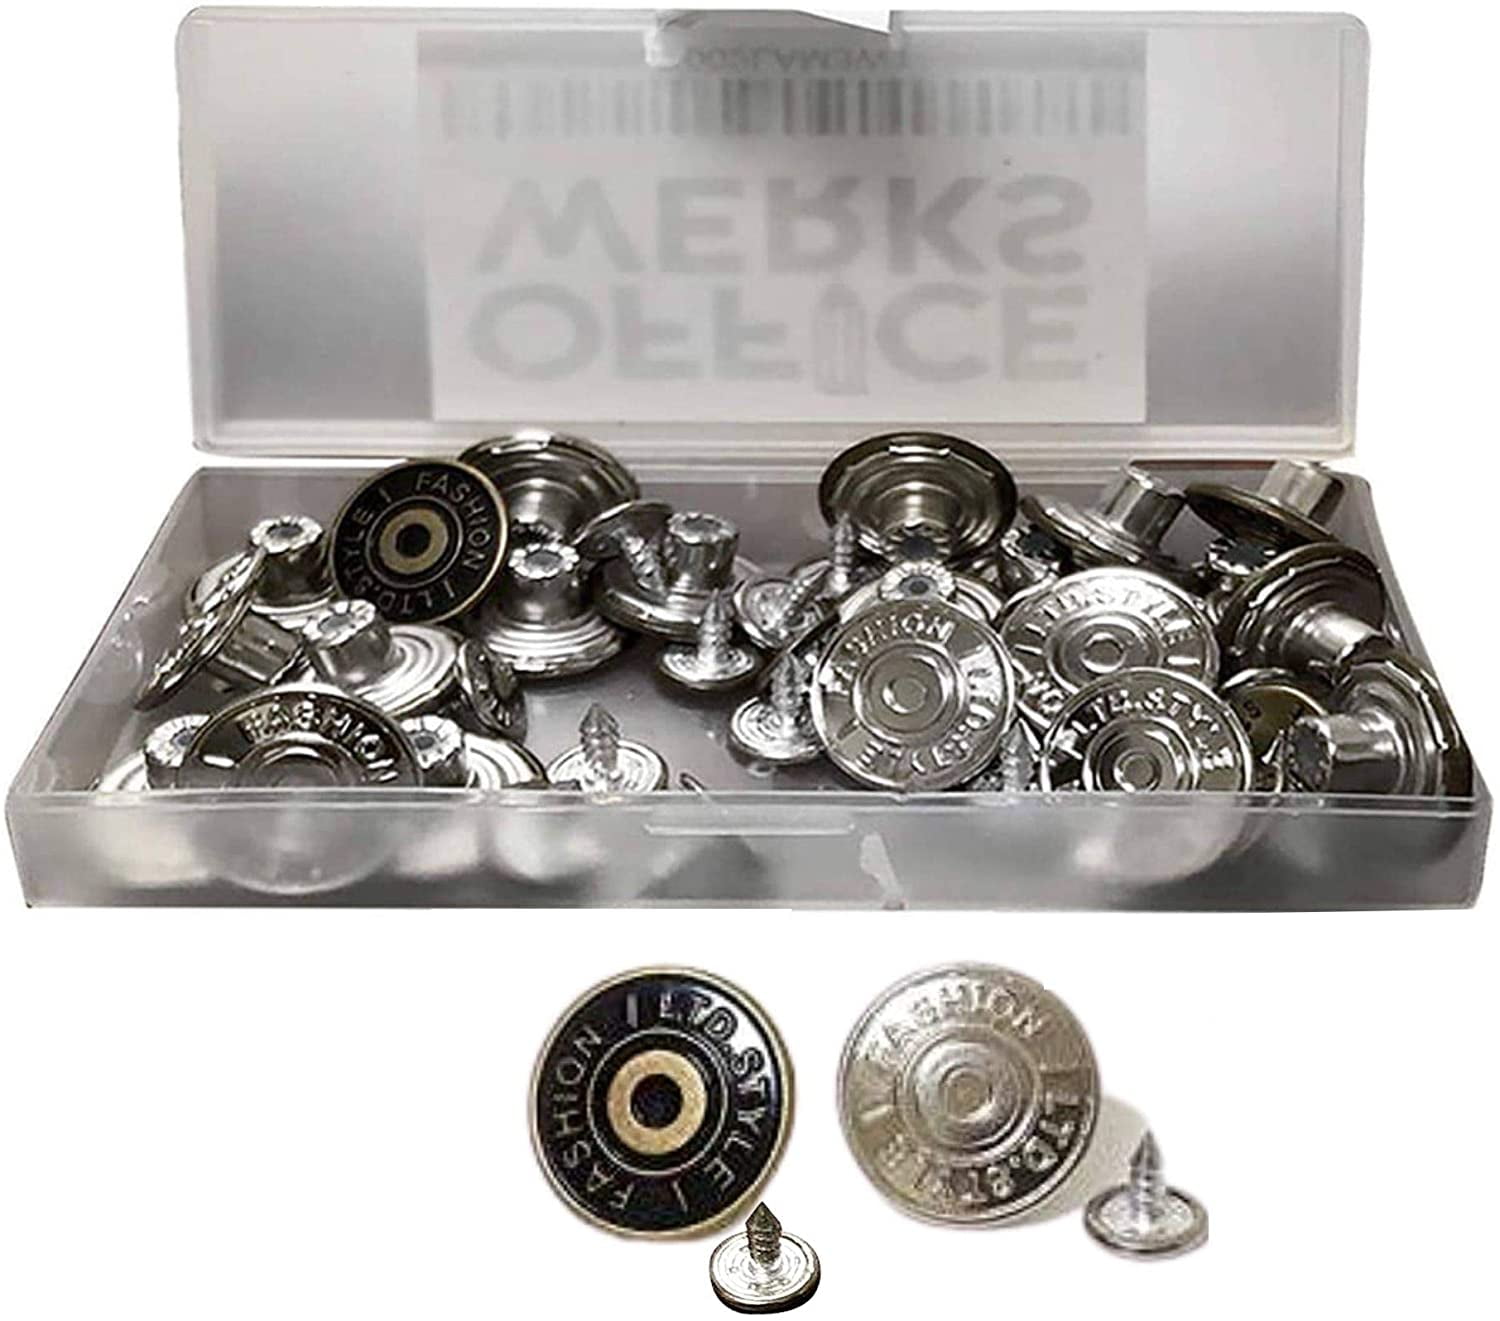 24 Sets Silver and Copper Jean Buttons, Replacement Kit with Buttons &  Fasteners in Clear Plastic Storage Box for Denims, Jeans, and Jackets  Repair (12 Pieces Per Color) 